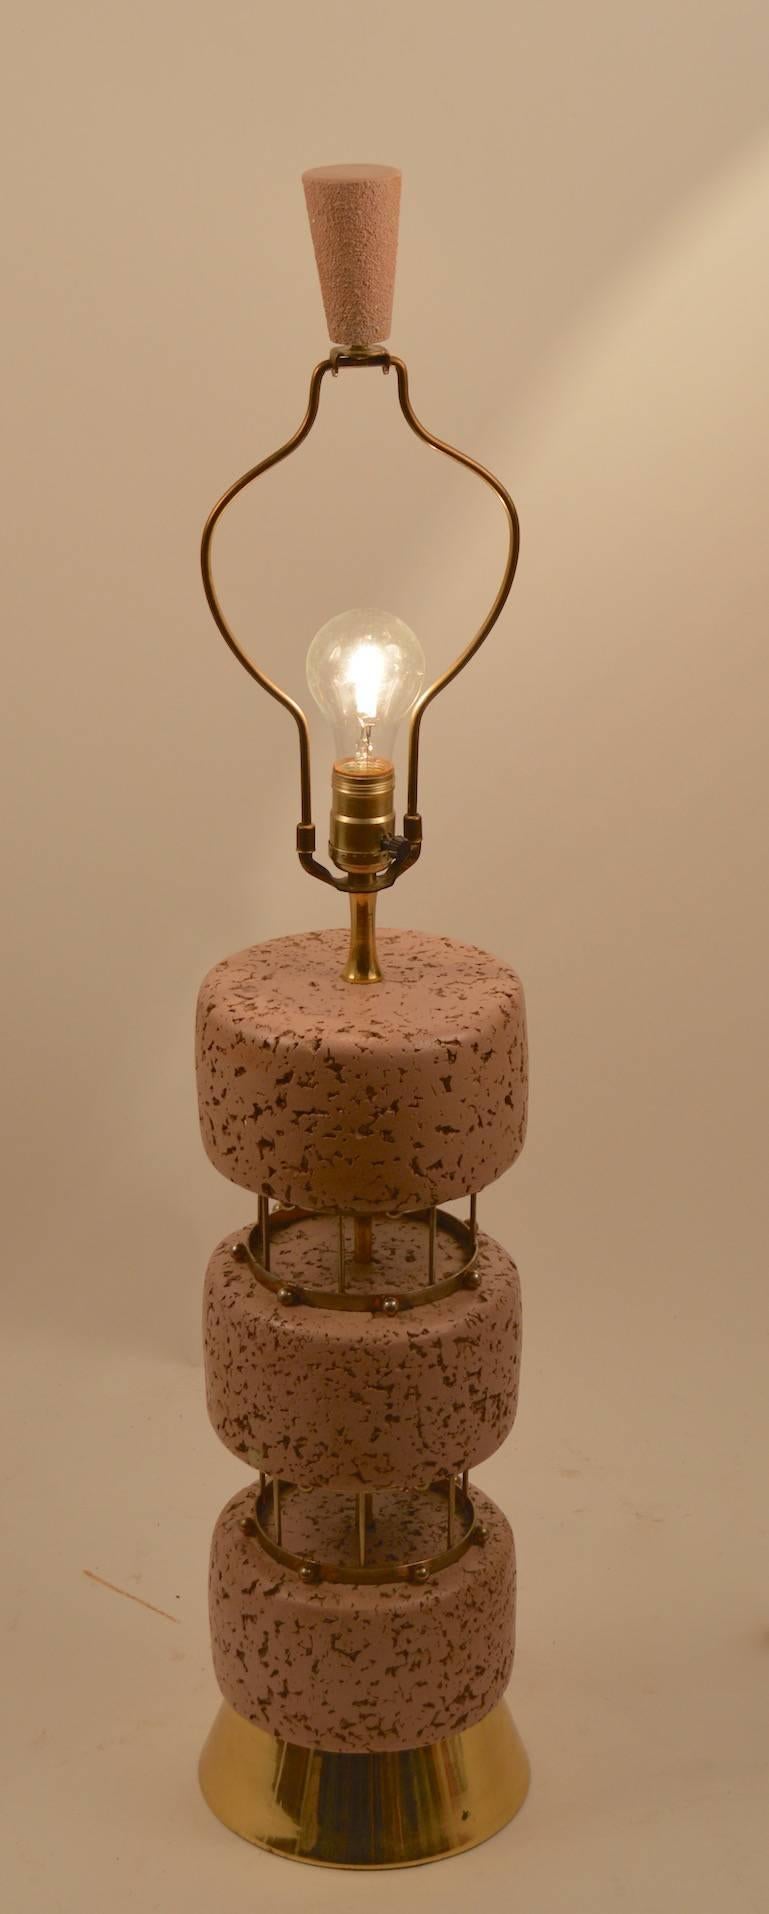 Plaster faux cork table lamps with brass colored metal spacer elements. Pair original, circa 1950s - working, clean, original condition, shades not included. Height to top of socket 24